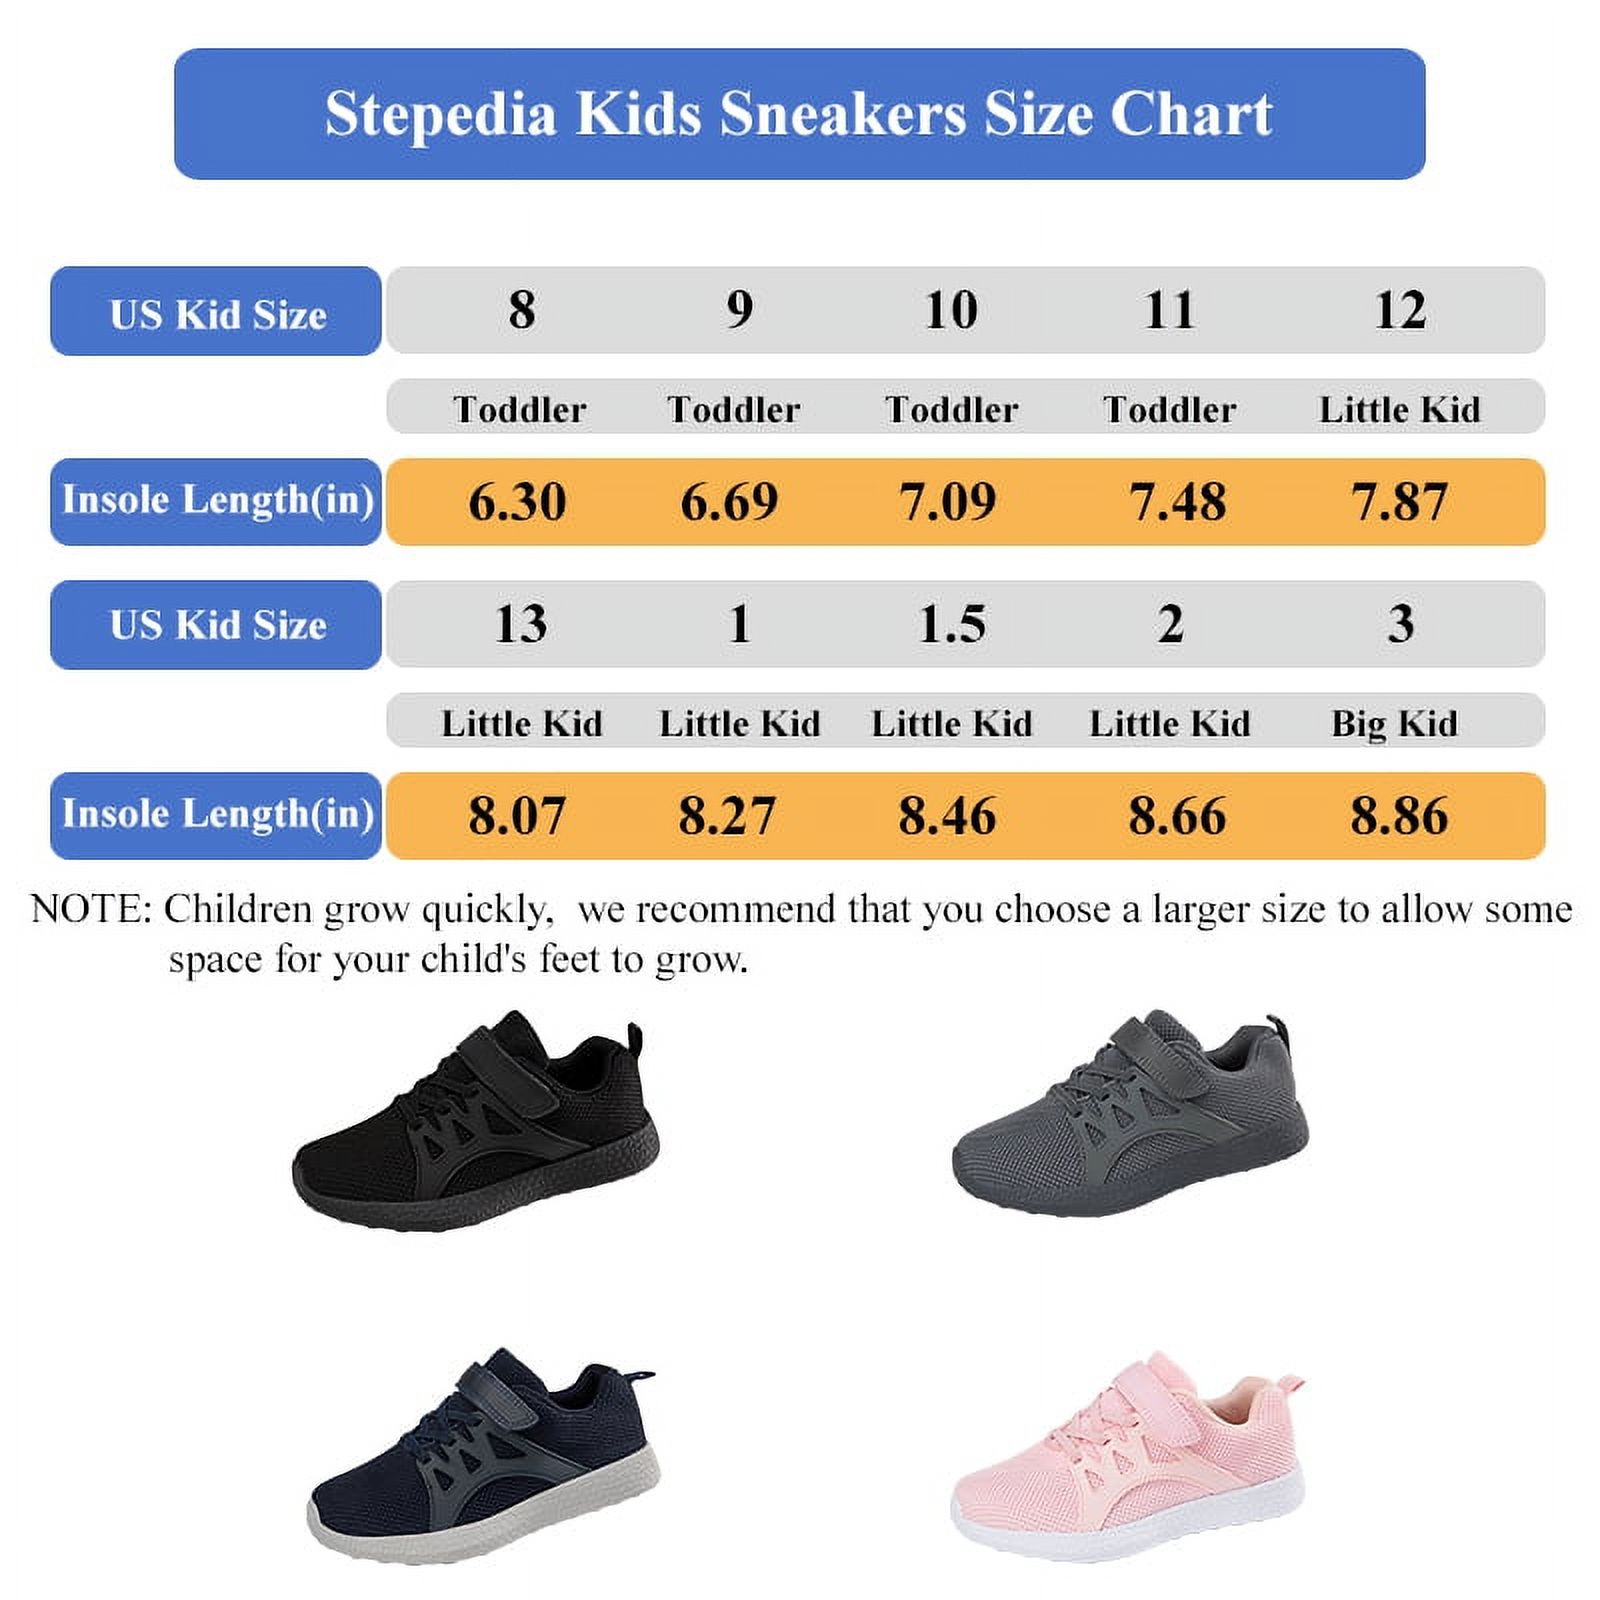 Stepedia Toddler Boys Girls Sneakers Kids Breathable Strap Athletic Running Tennis Shoes Black, Size 3 - image 2 of 6